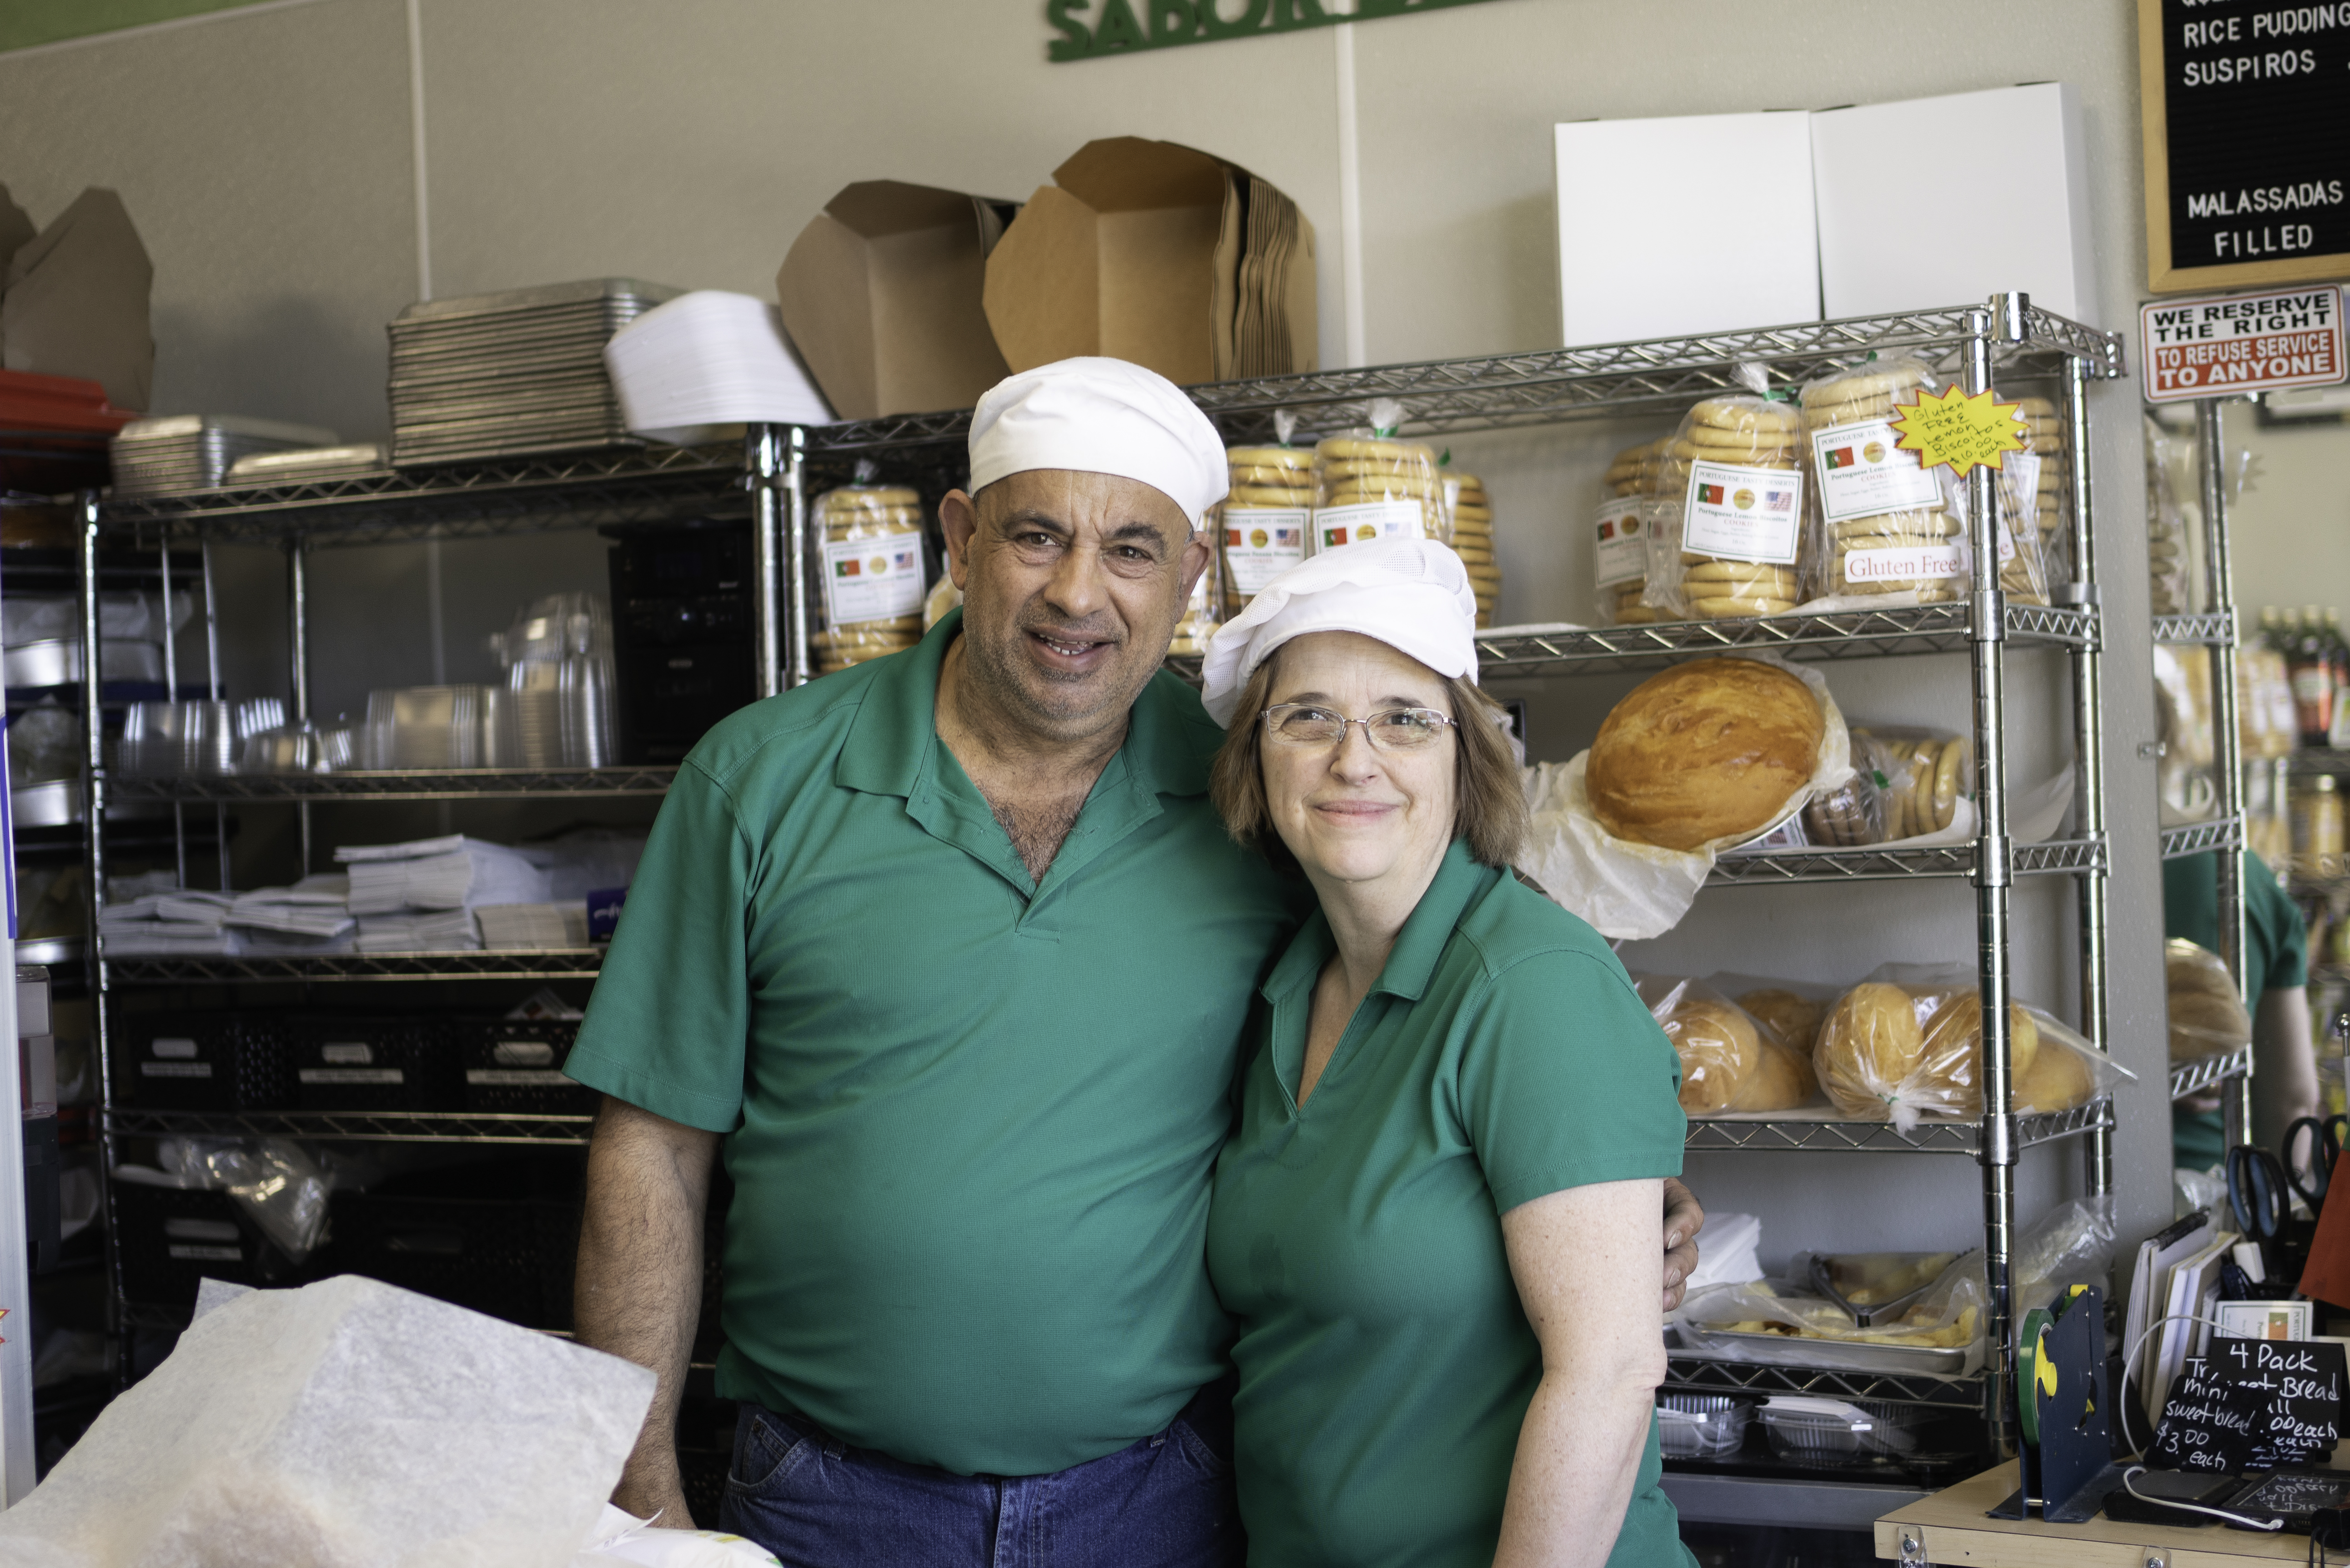 Photo of the bakery's owners, Nelio, on the left, and Teresa, on the right